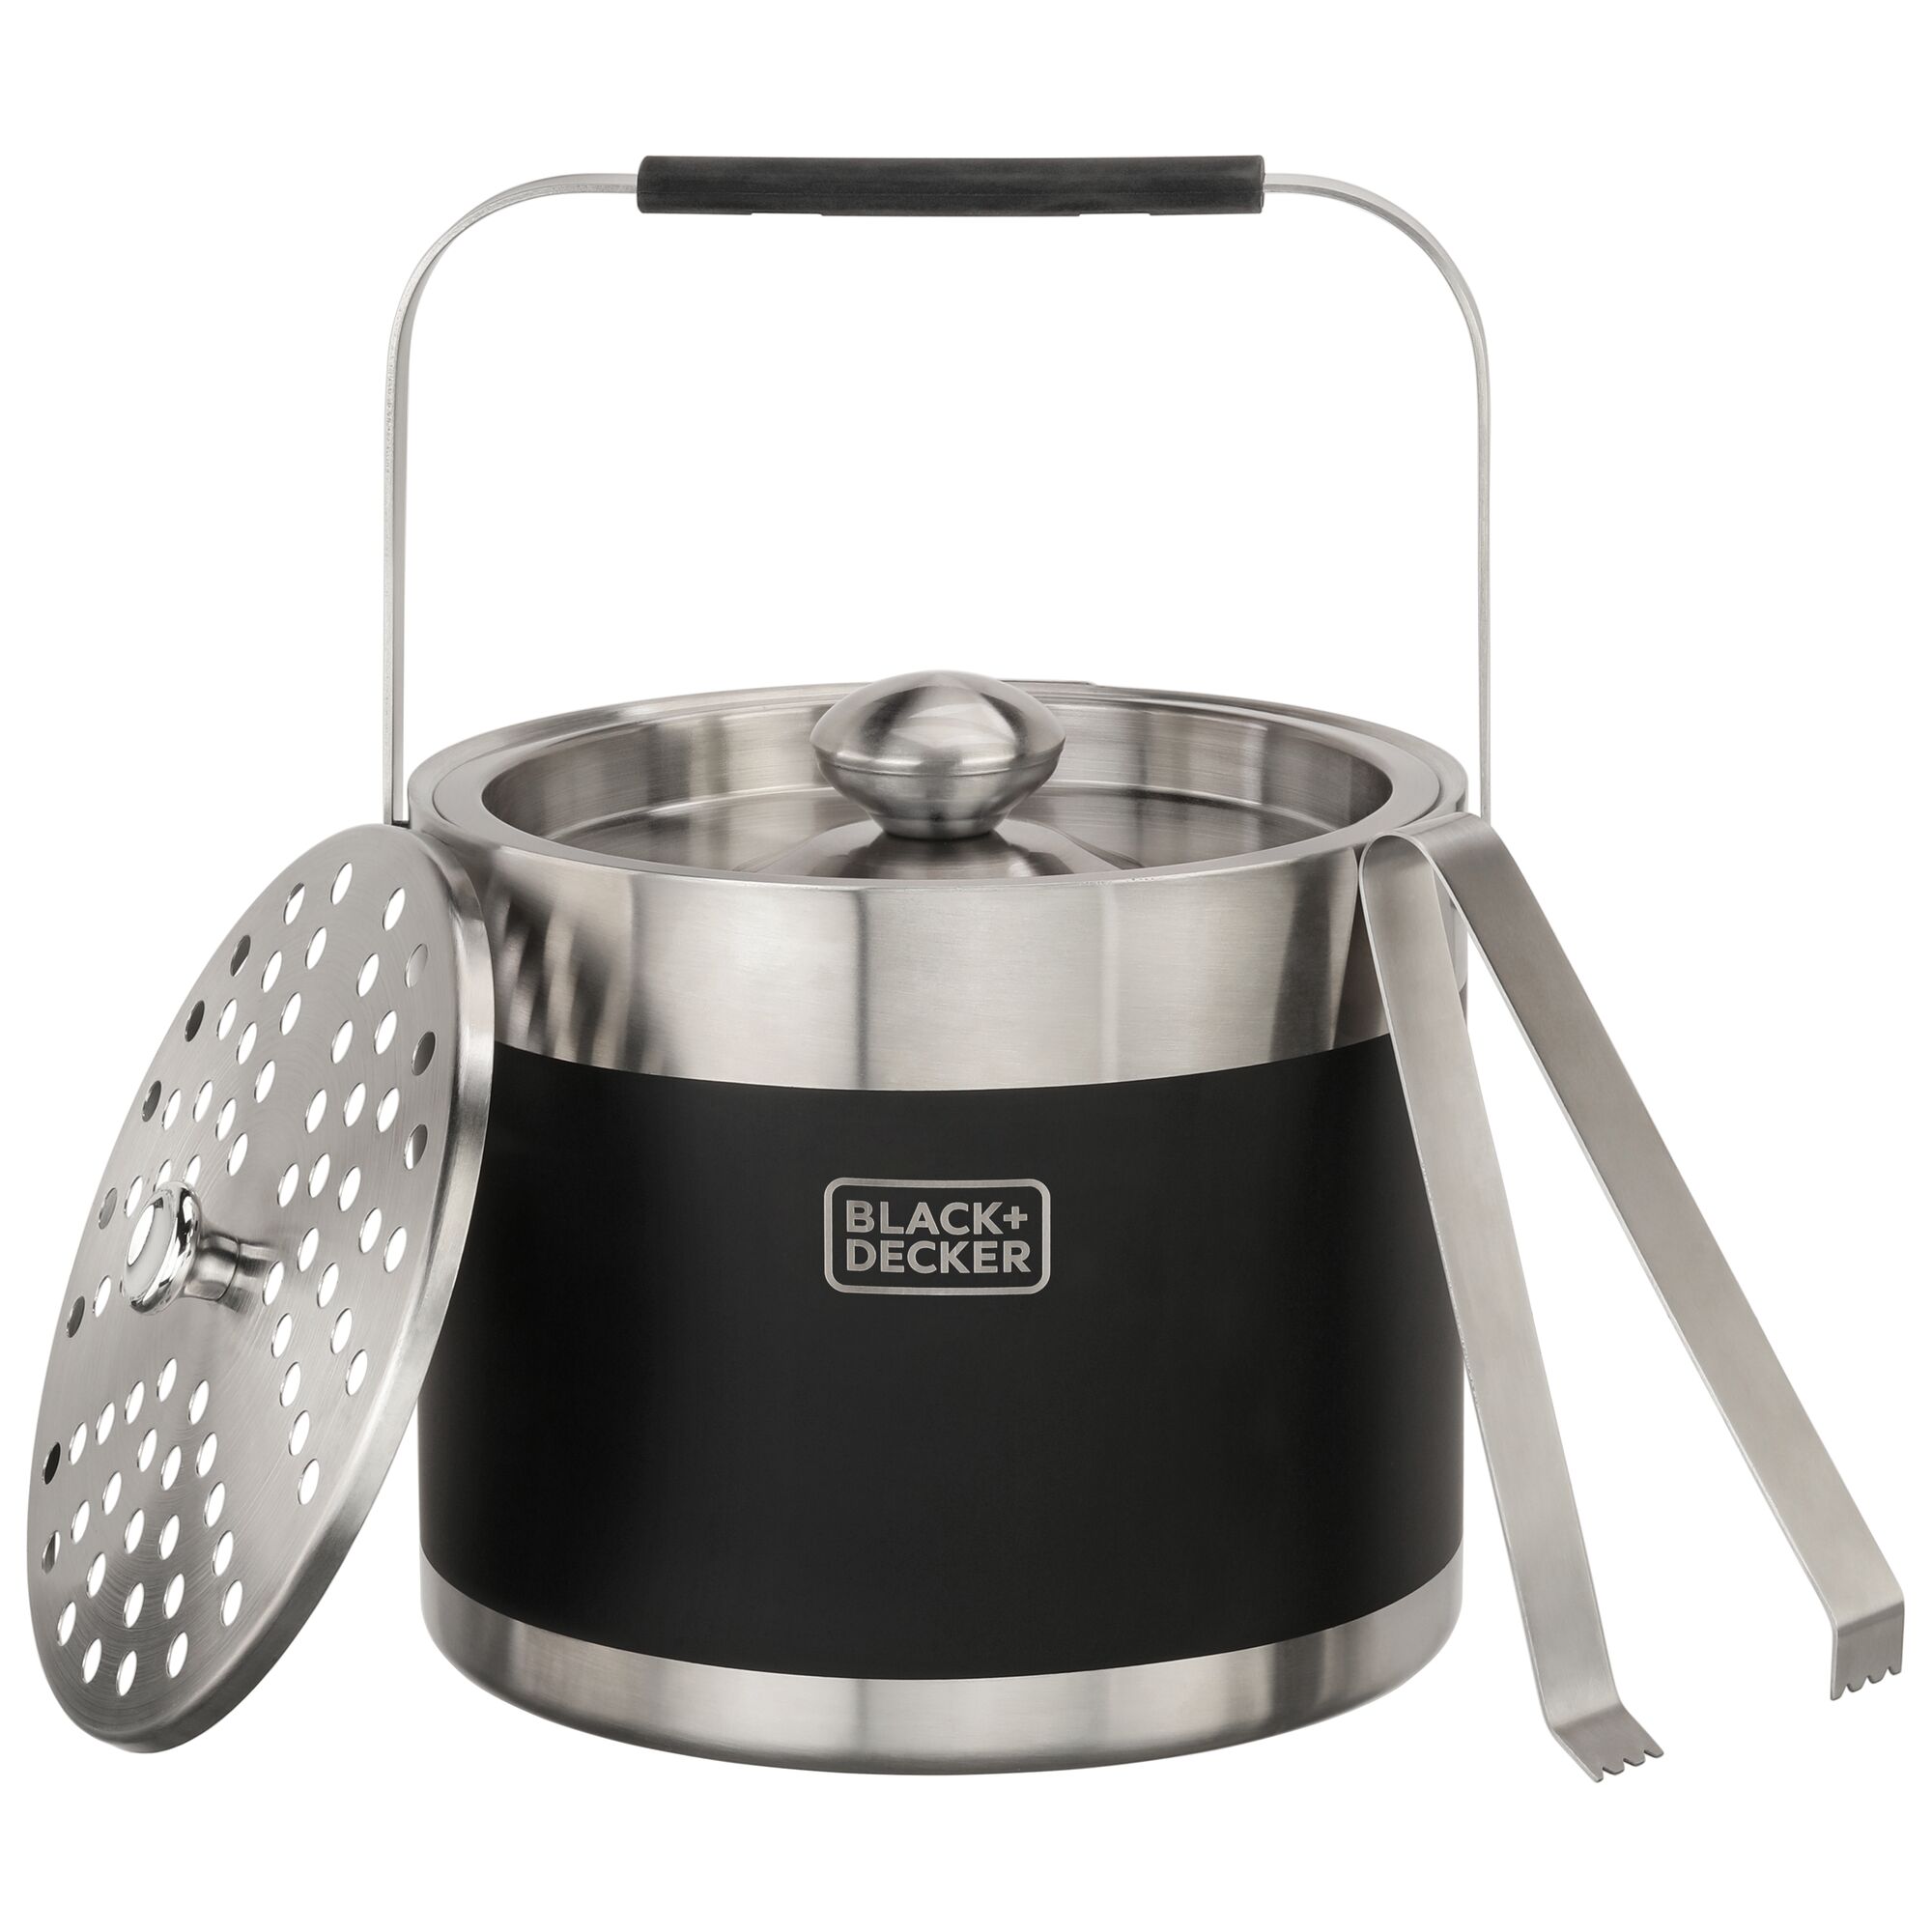 Black and decker ice bucket with silver metal tongs & cover